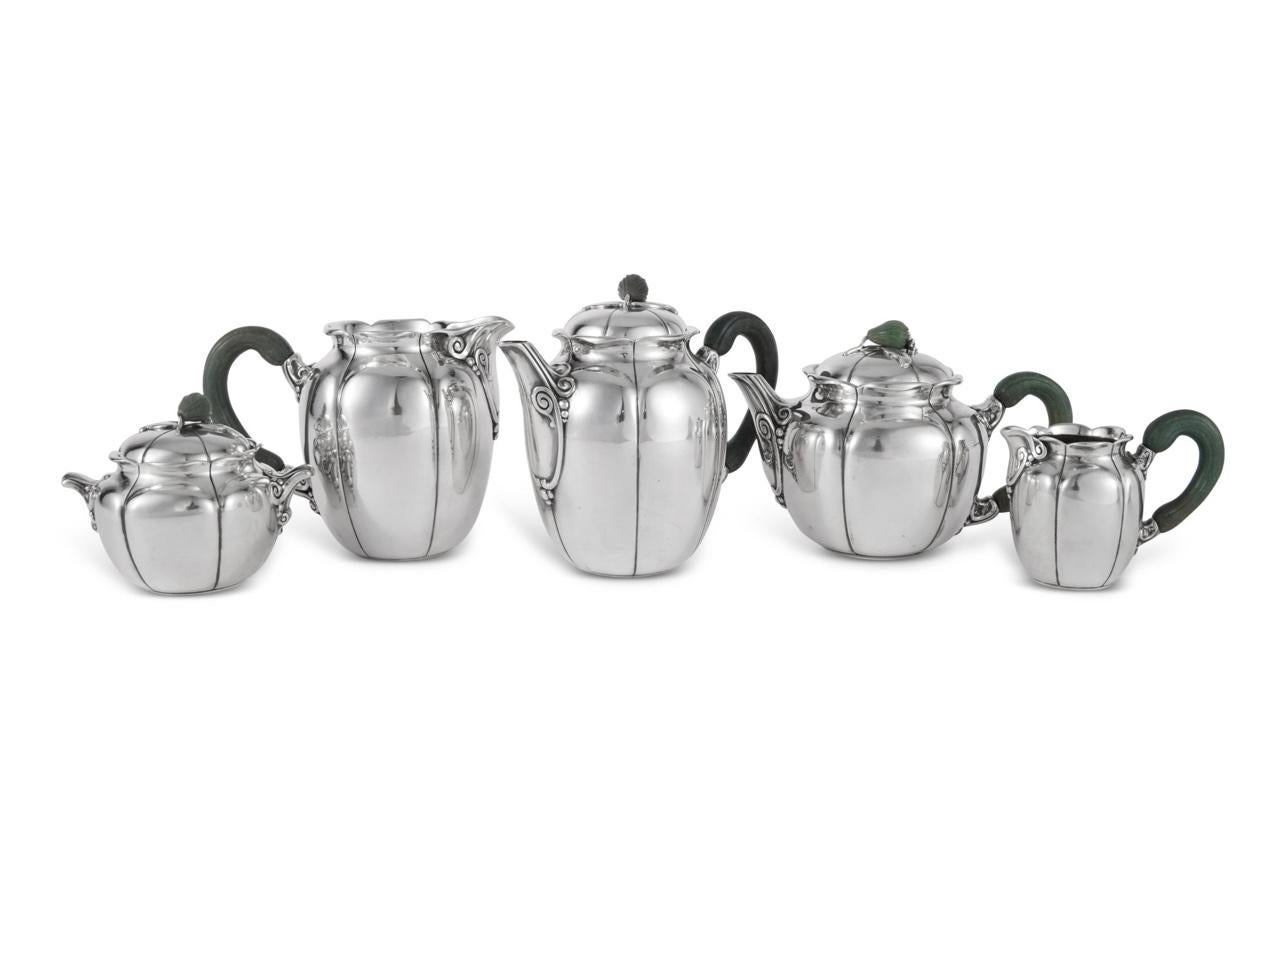 Tea and coffee service in sterling pure silver and nephrite by Jean E. Puiforcat.

Service including :
- a coffee pot 15.5 cm
- a teapot 11.5 cm 
- a milk jug 12,5 cm 
- a milk jug 7 cm 
- a sugar bowl 10 cm

Minerve Solid Silver 950/1000